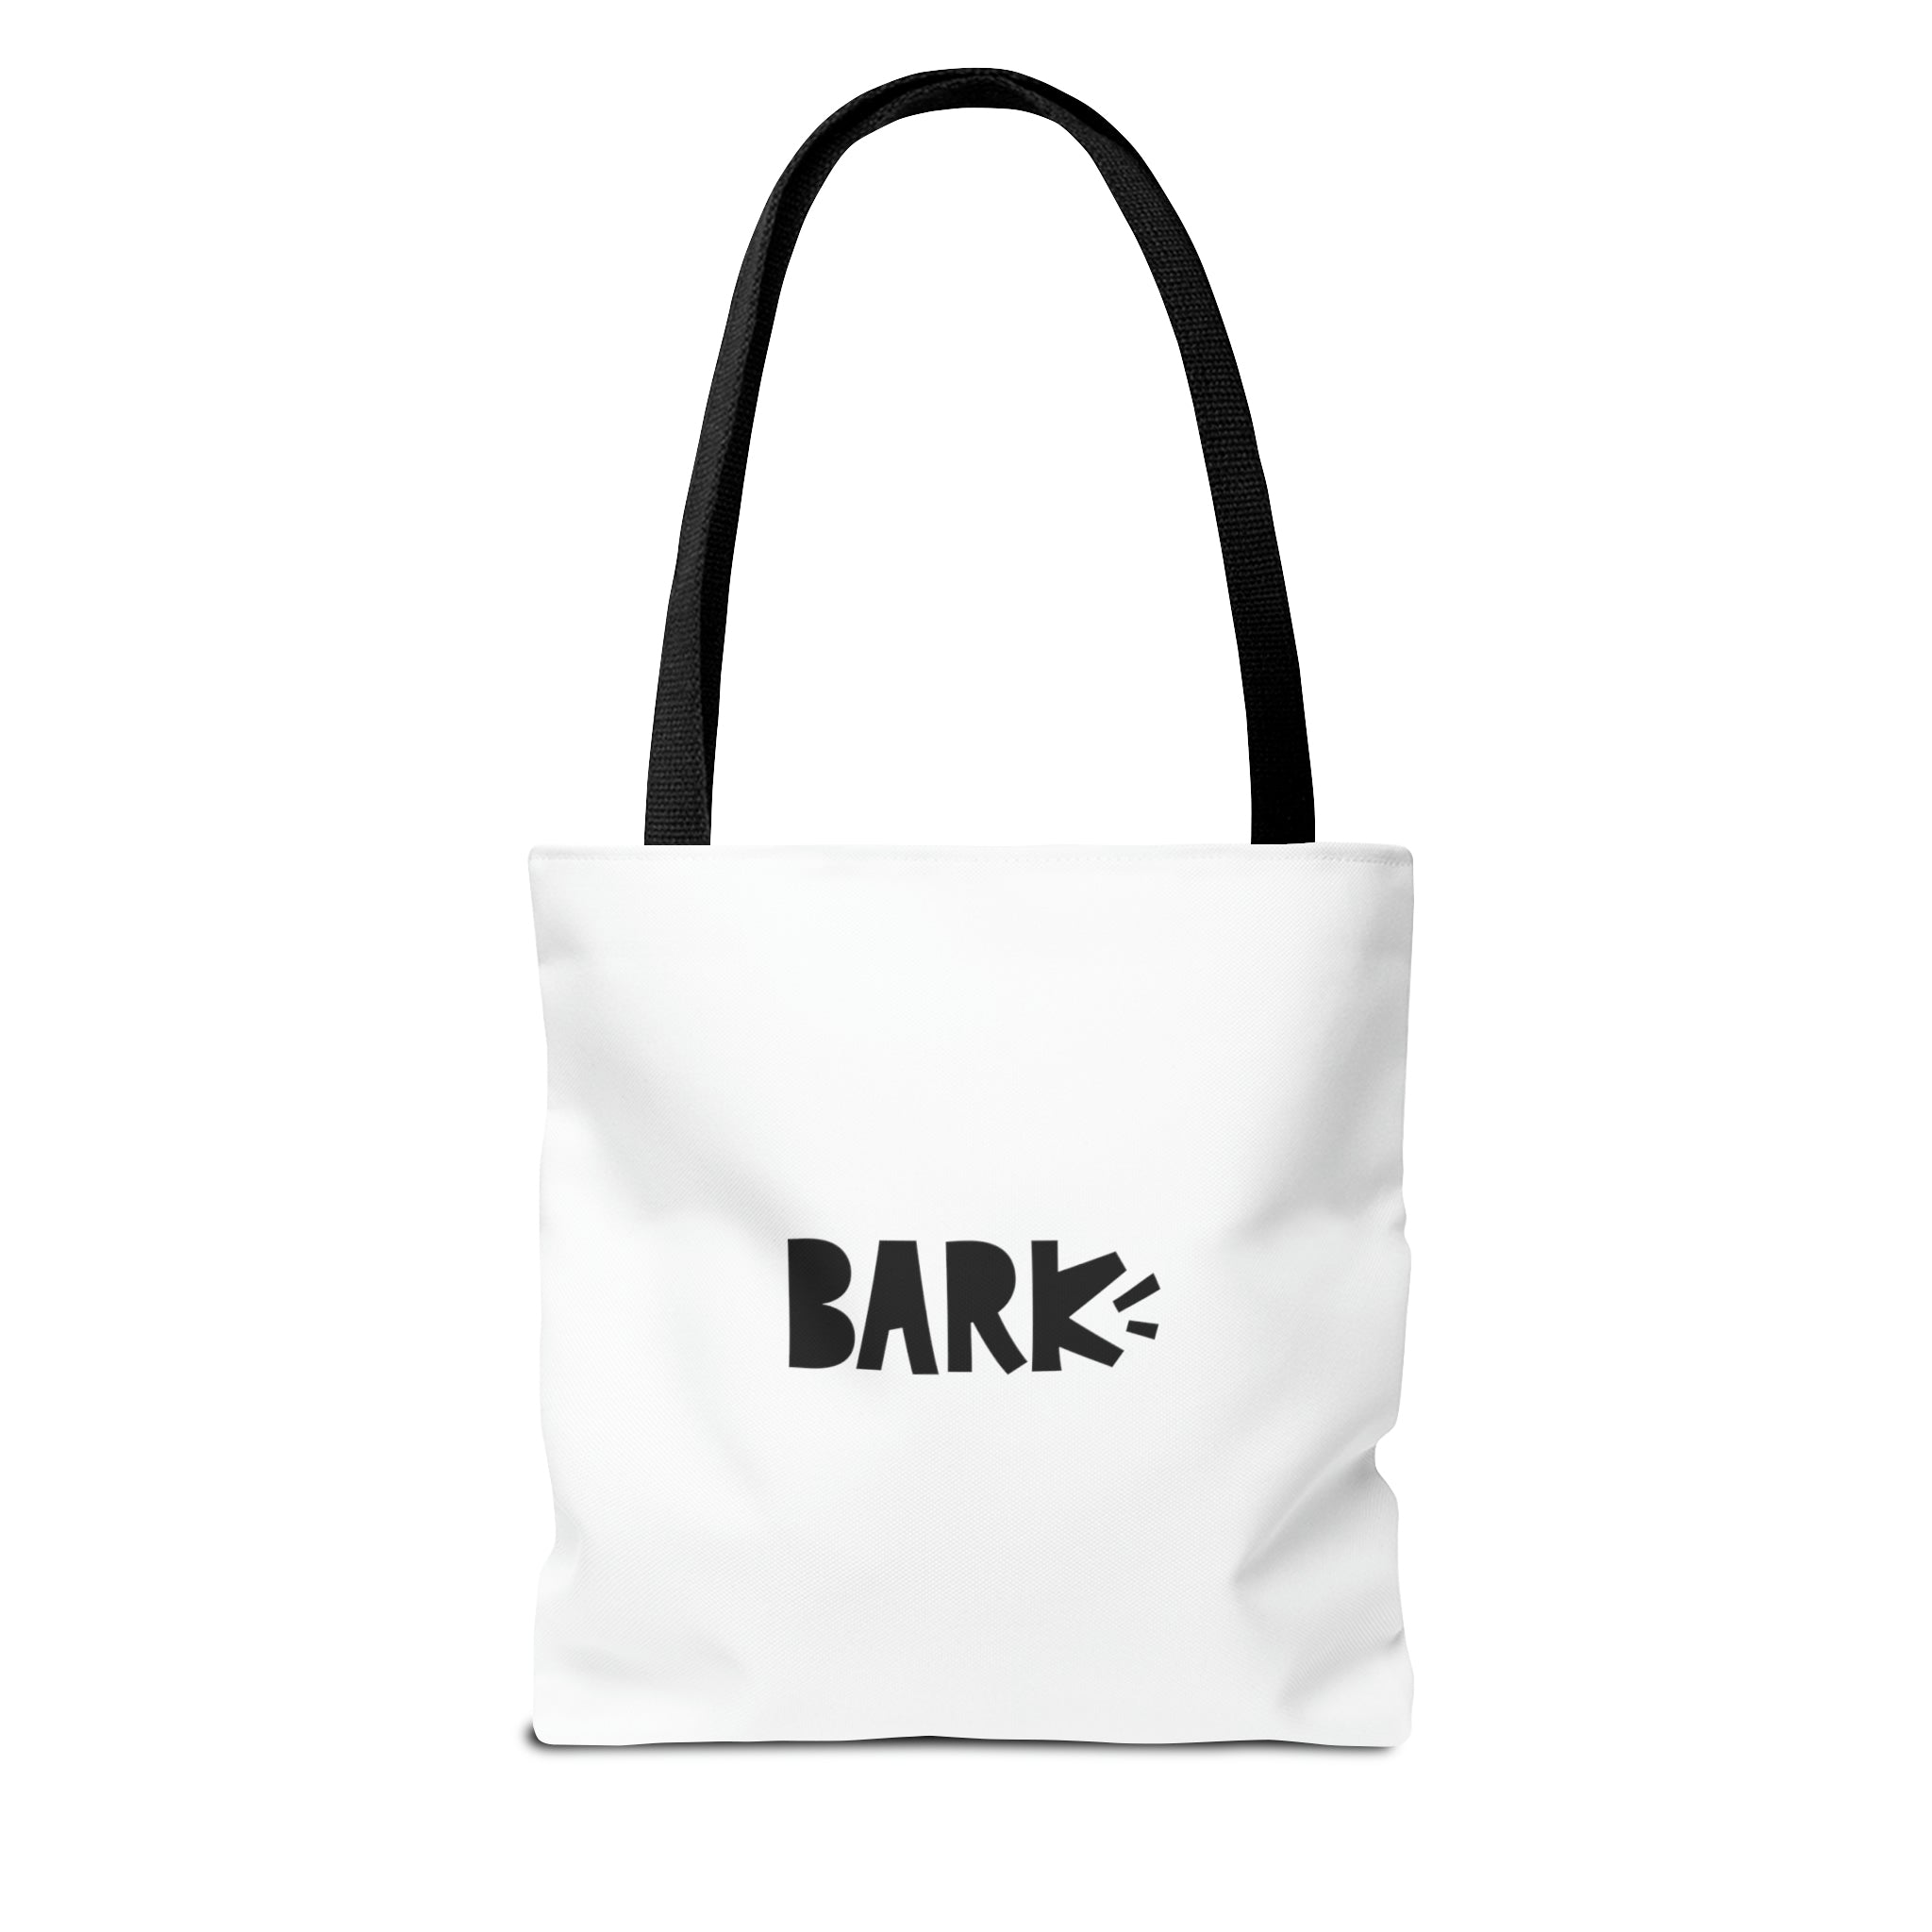 Totes About My Dog - Tote Bag